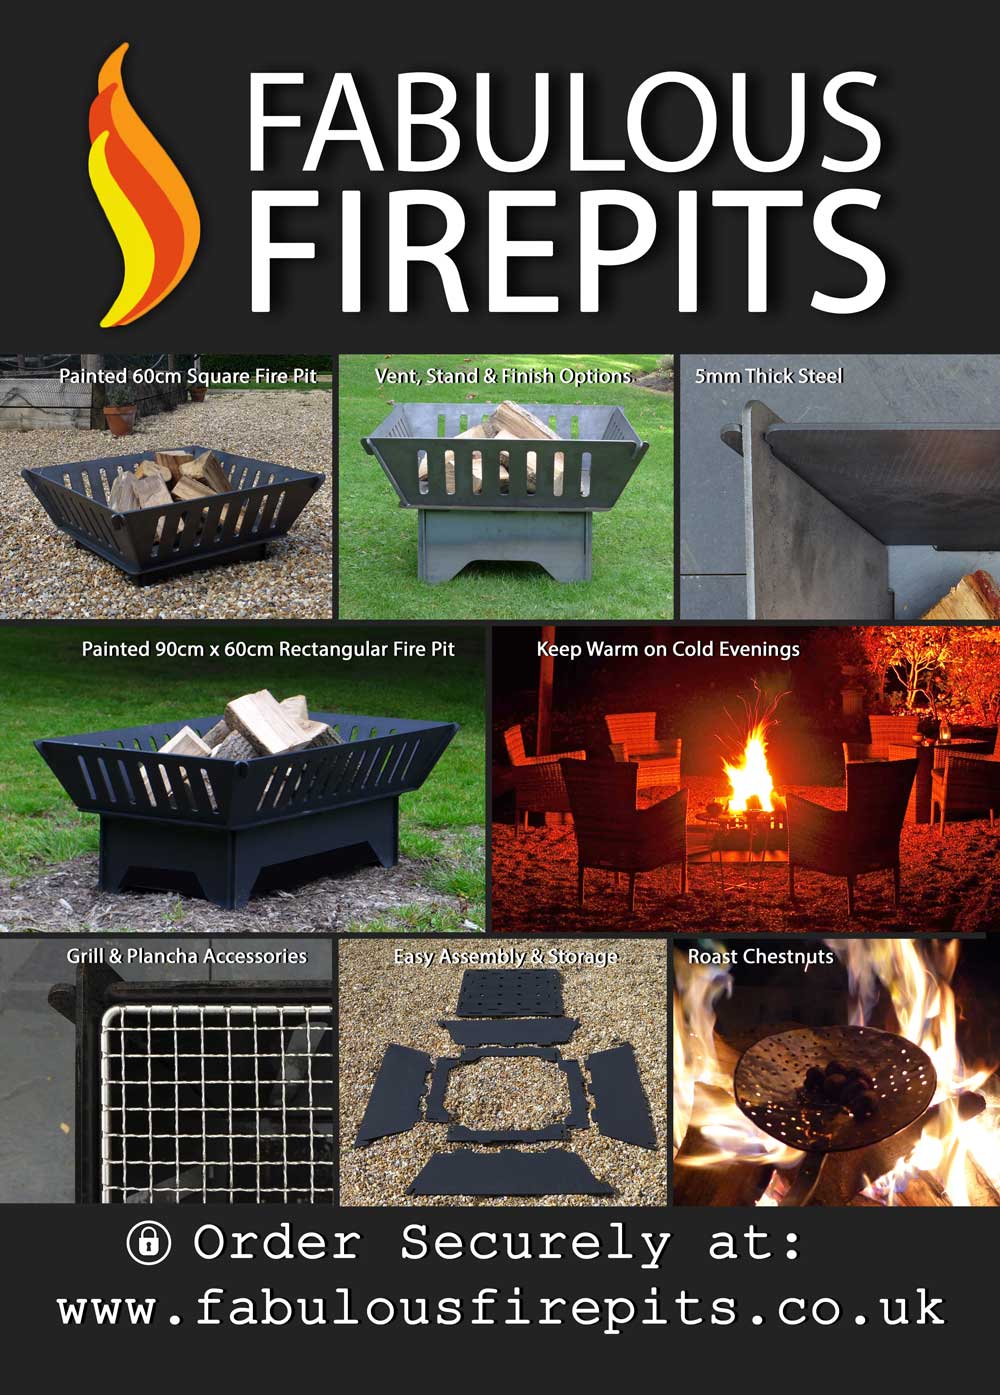 How To Choose A Fire Pit Fabulous, Are Fire Pits Dangerous Uk